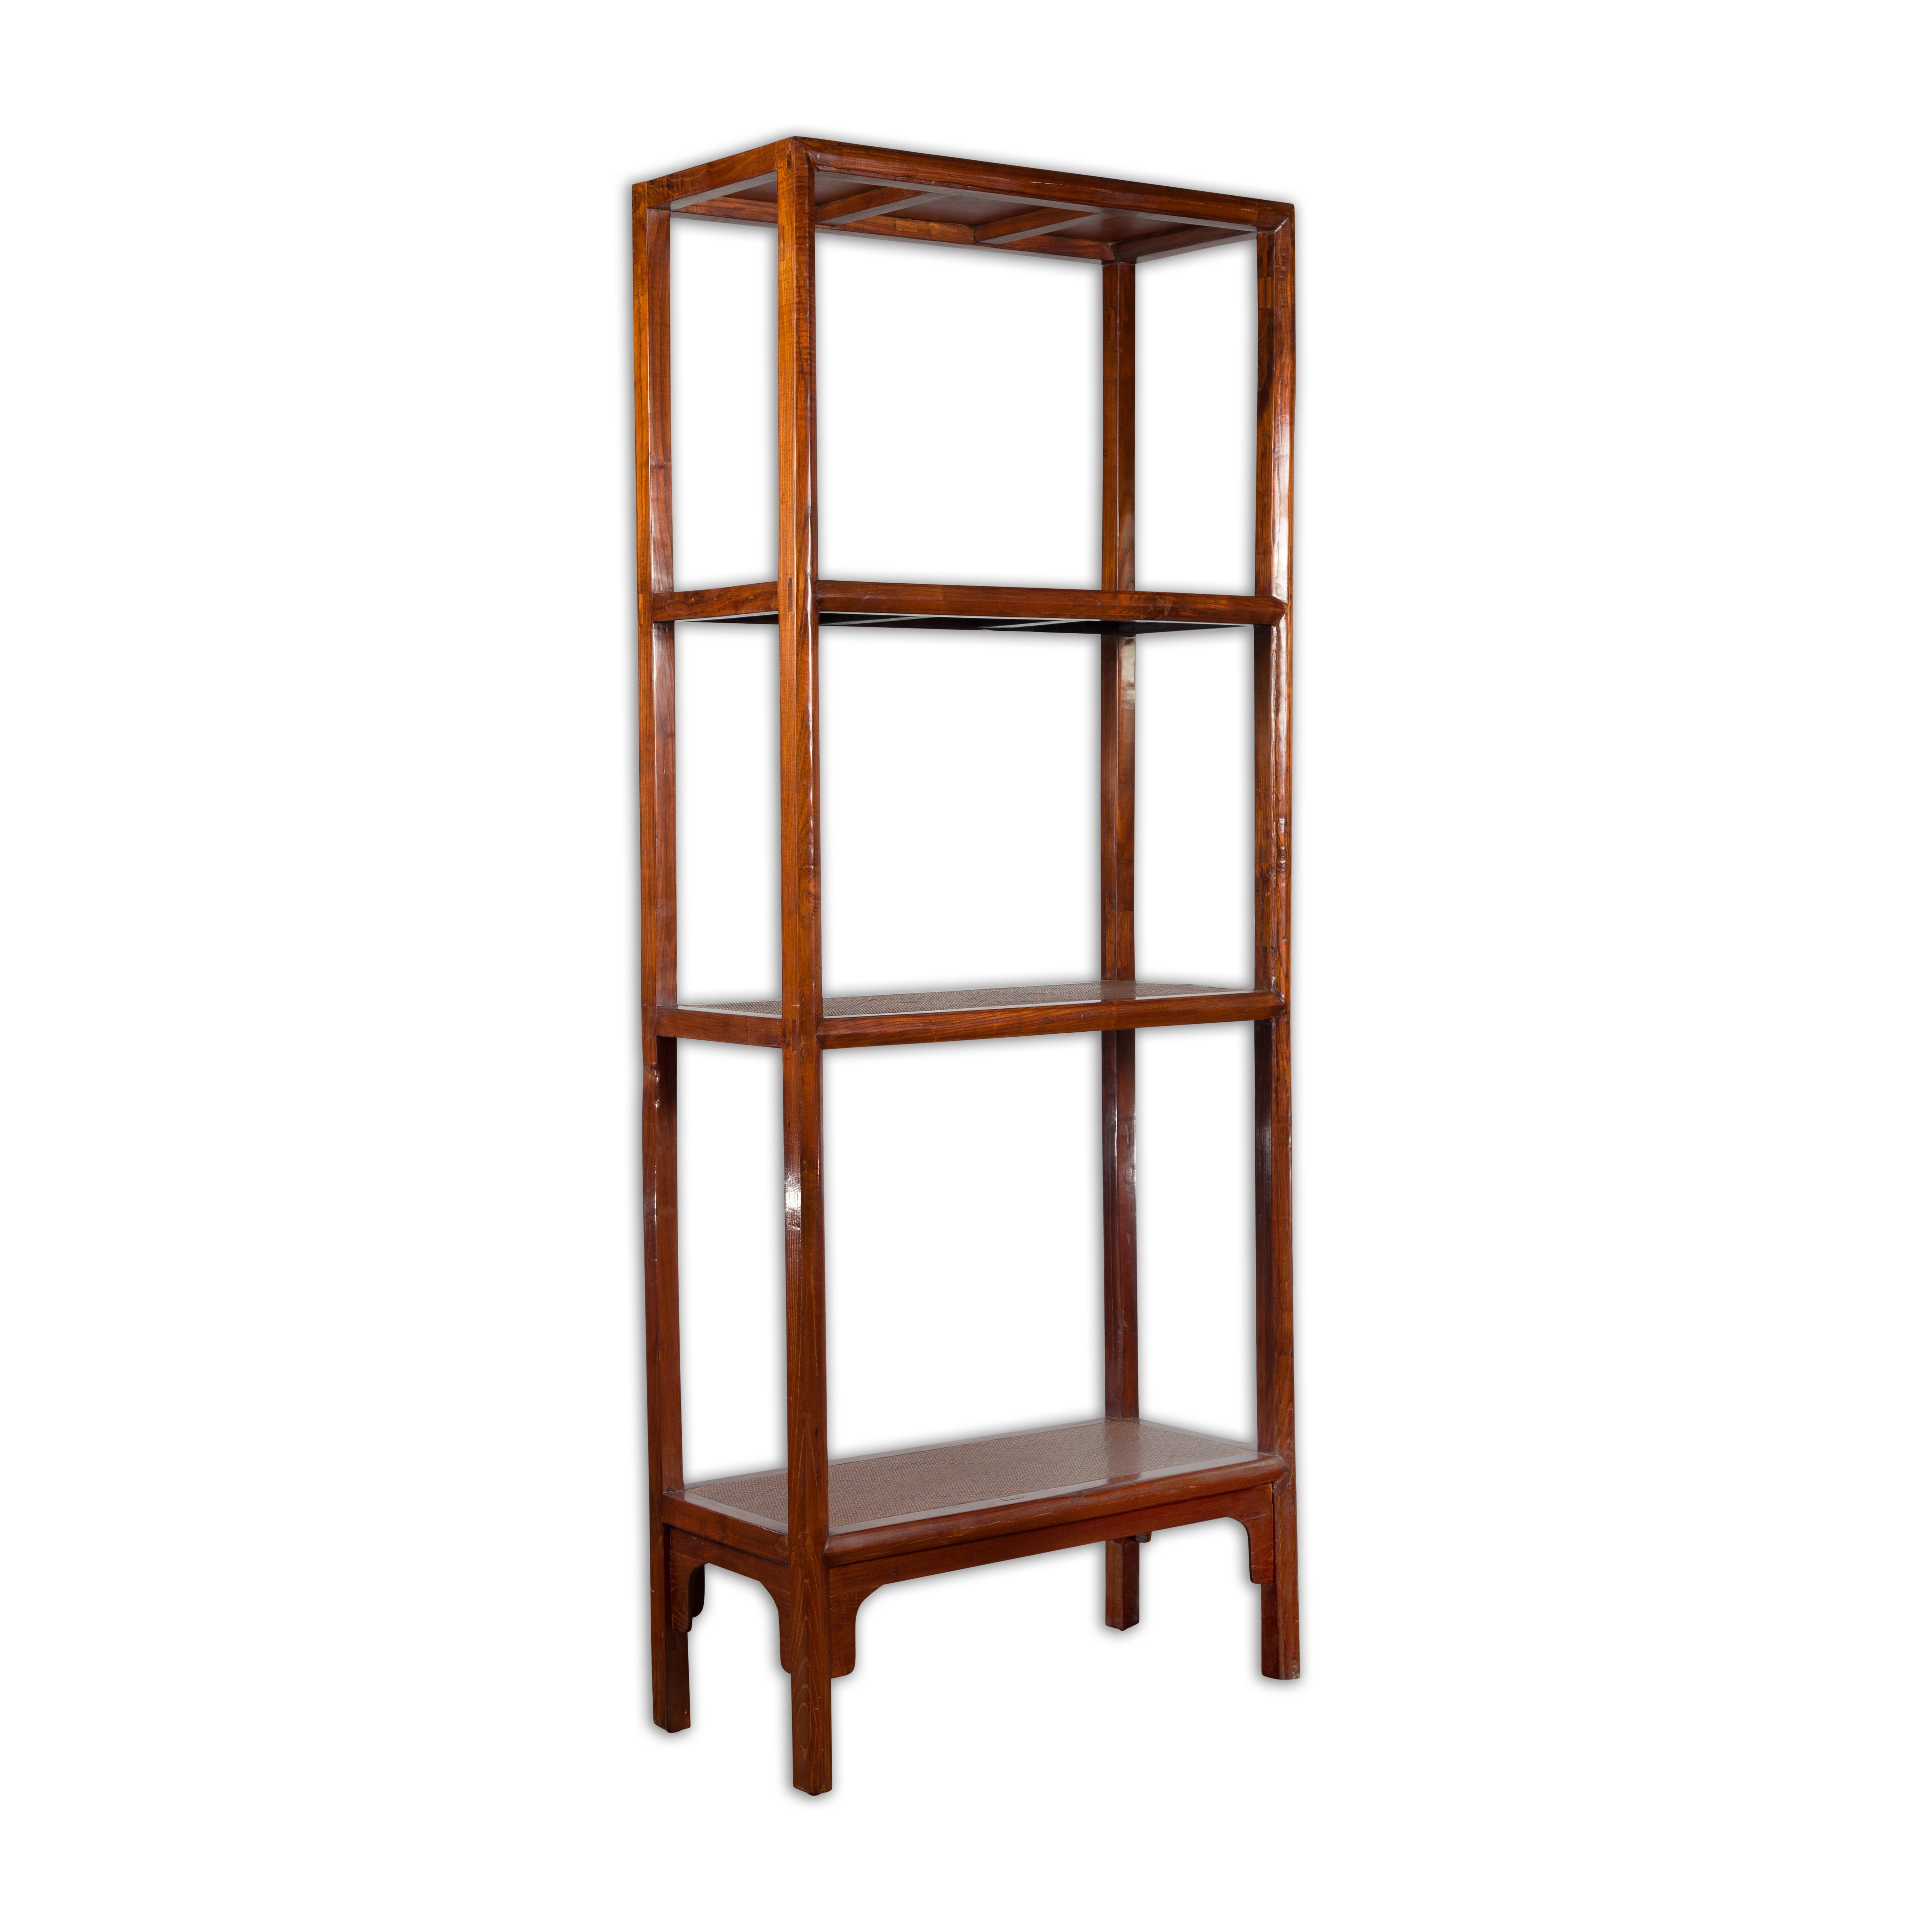 Chinese Early 20th Century Wooden Bookcase with Woven Rattan Shelves and Apron For Sale 9